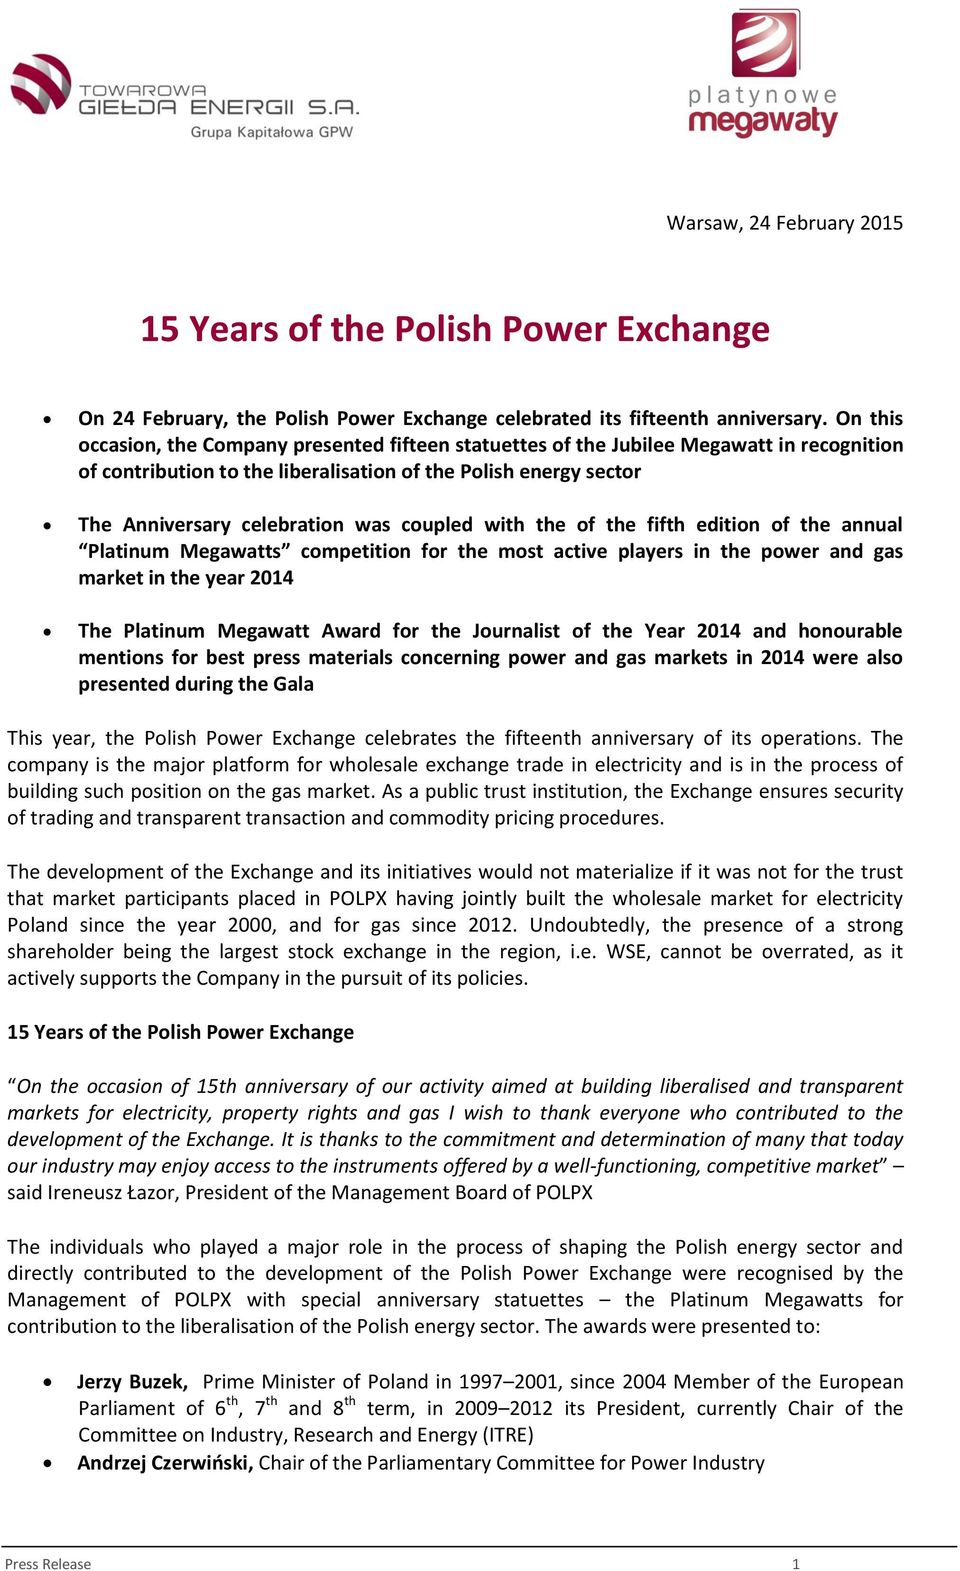 coupled with the of the fifth edition of the annual Platinum Megawatts competition for the most active players in the power and gas market in the year 2014 The Platinum Megawatt Award for the